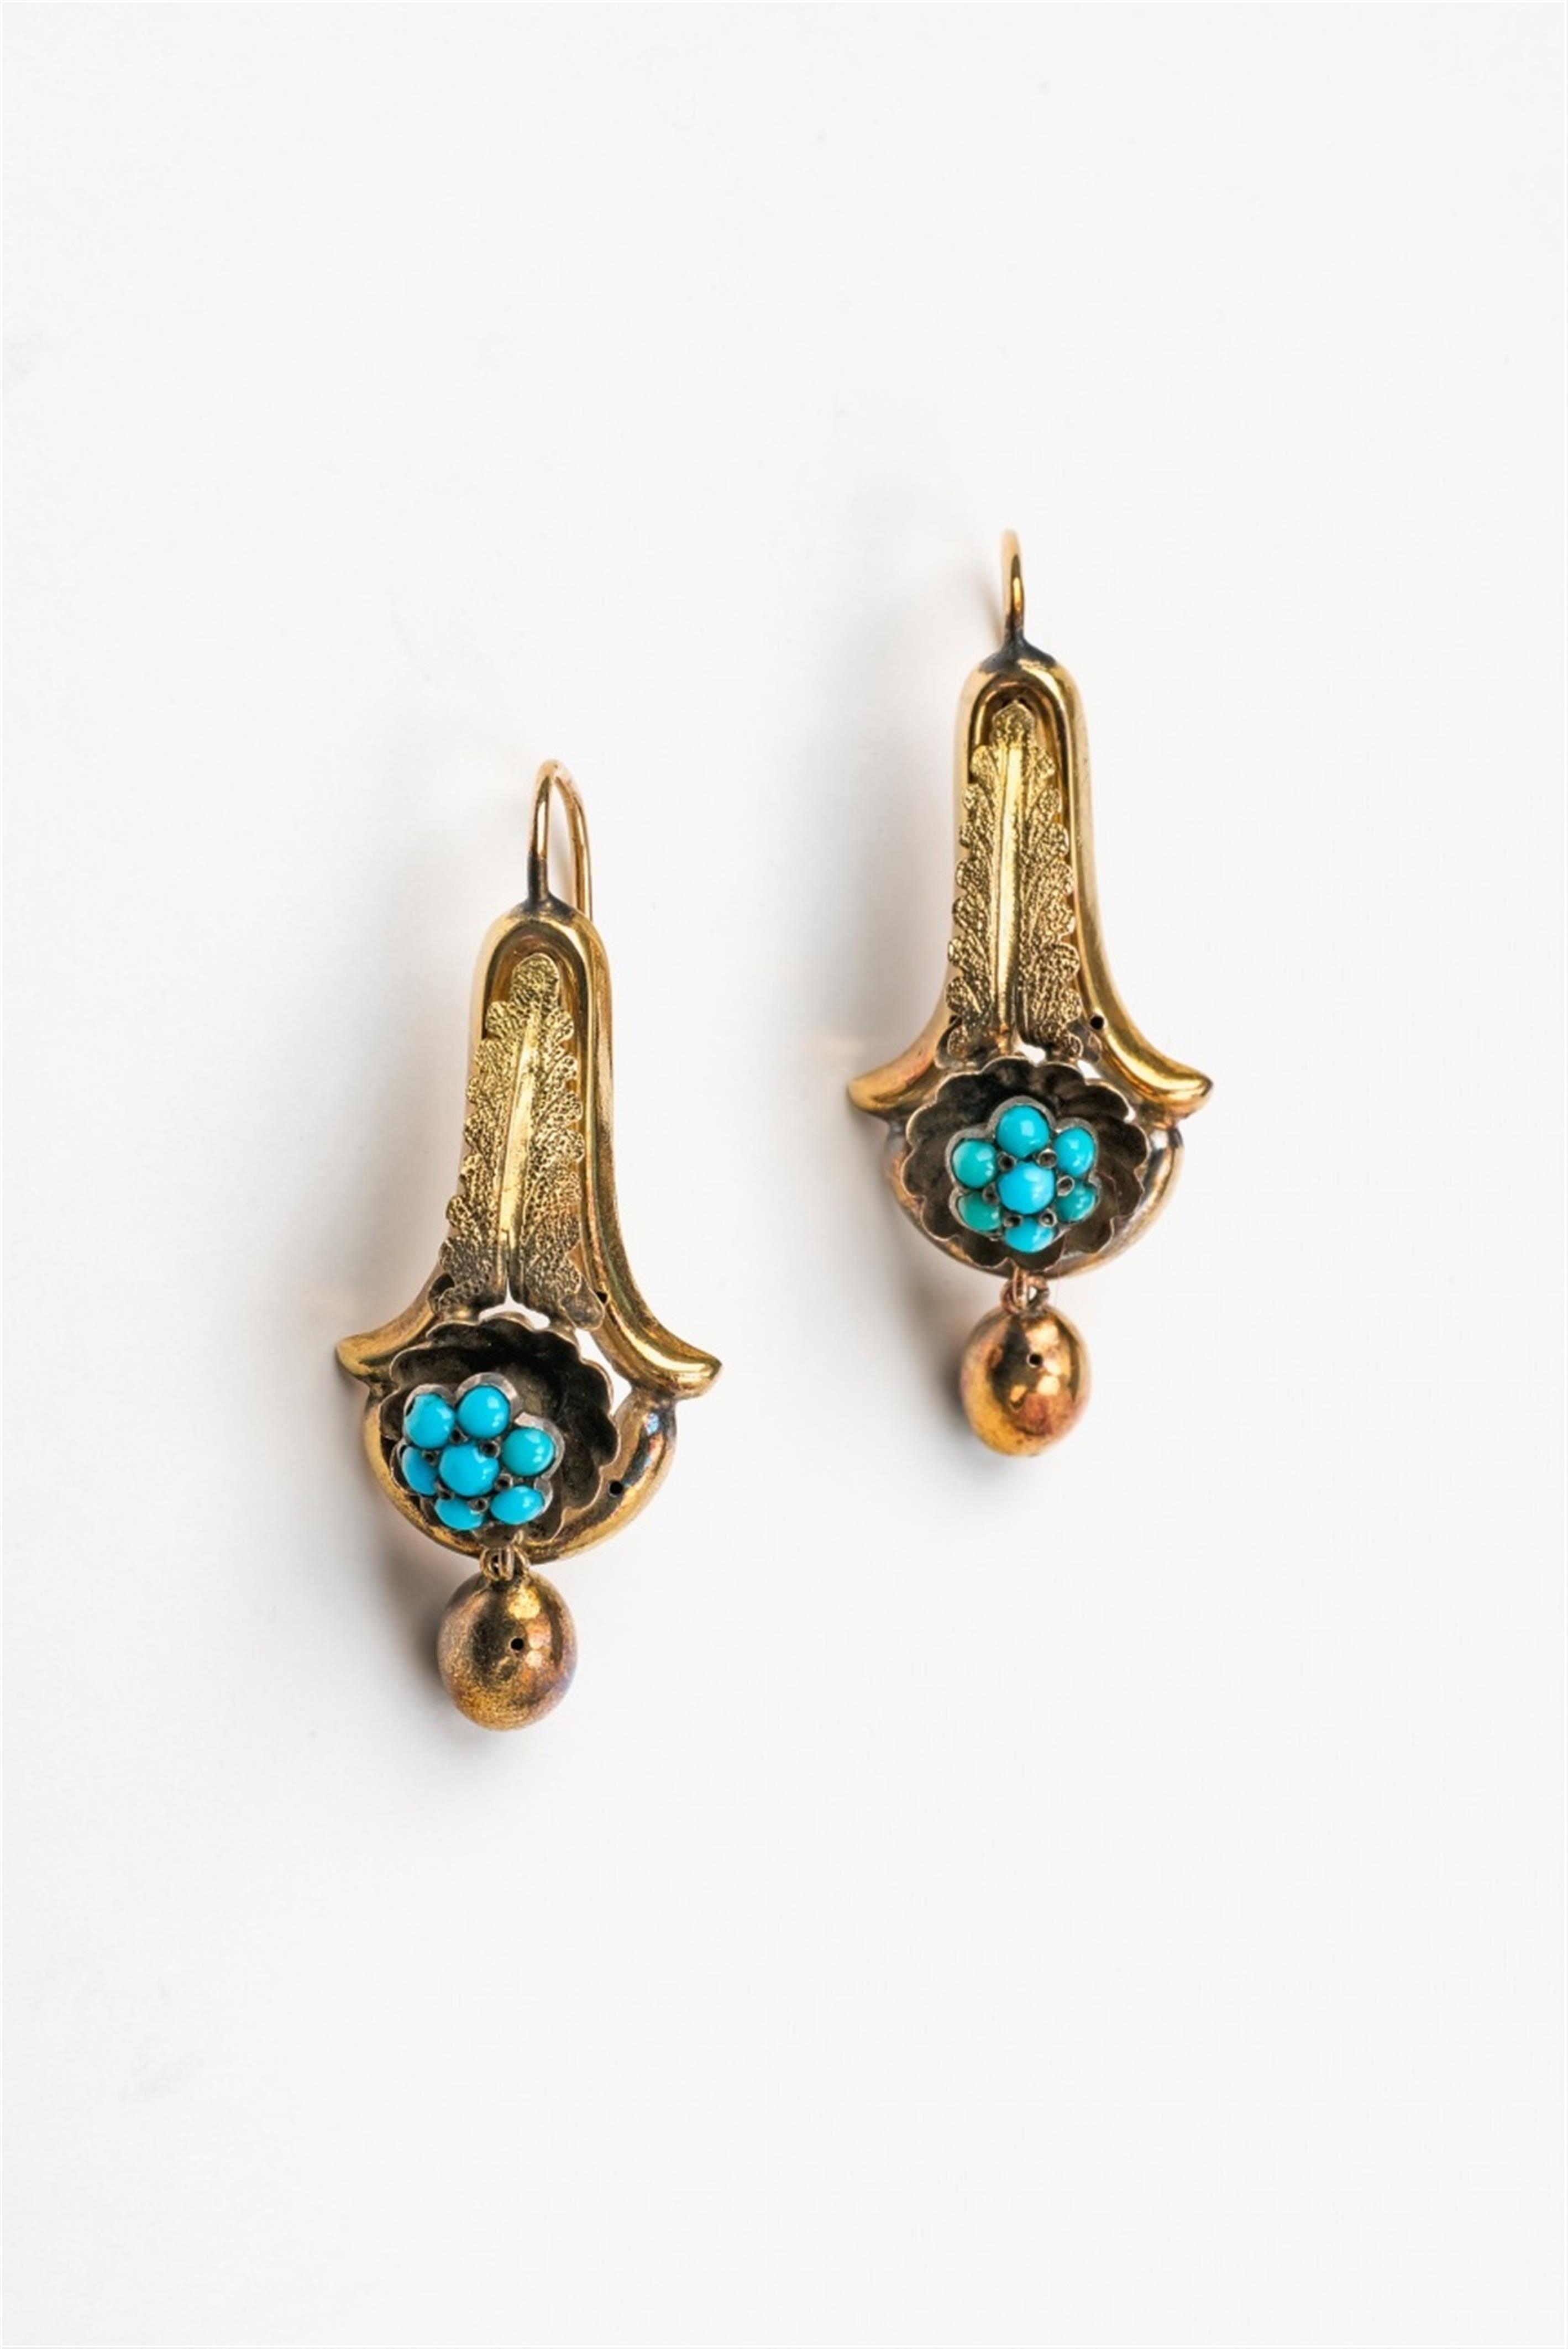 A pair of 14k gold and turquoise pendant earrings - image-1